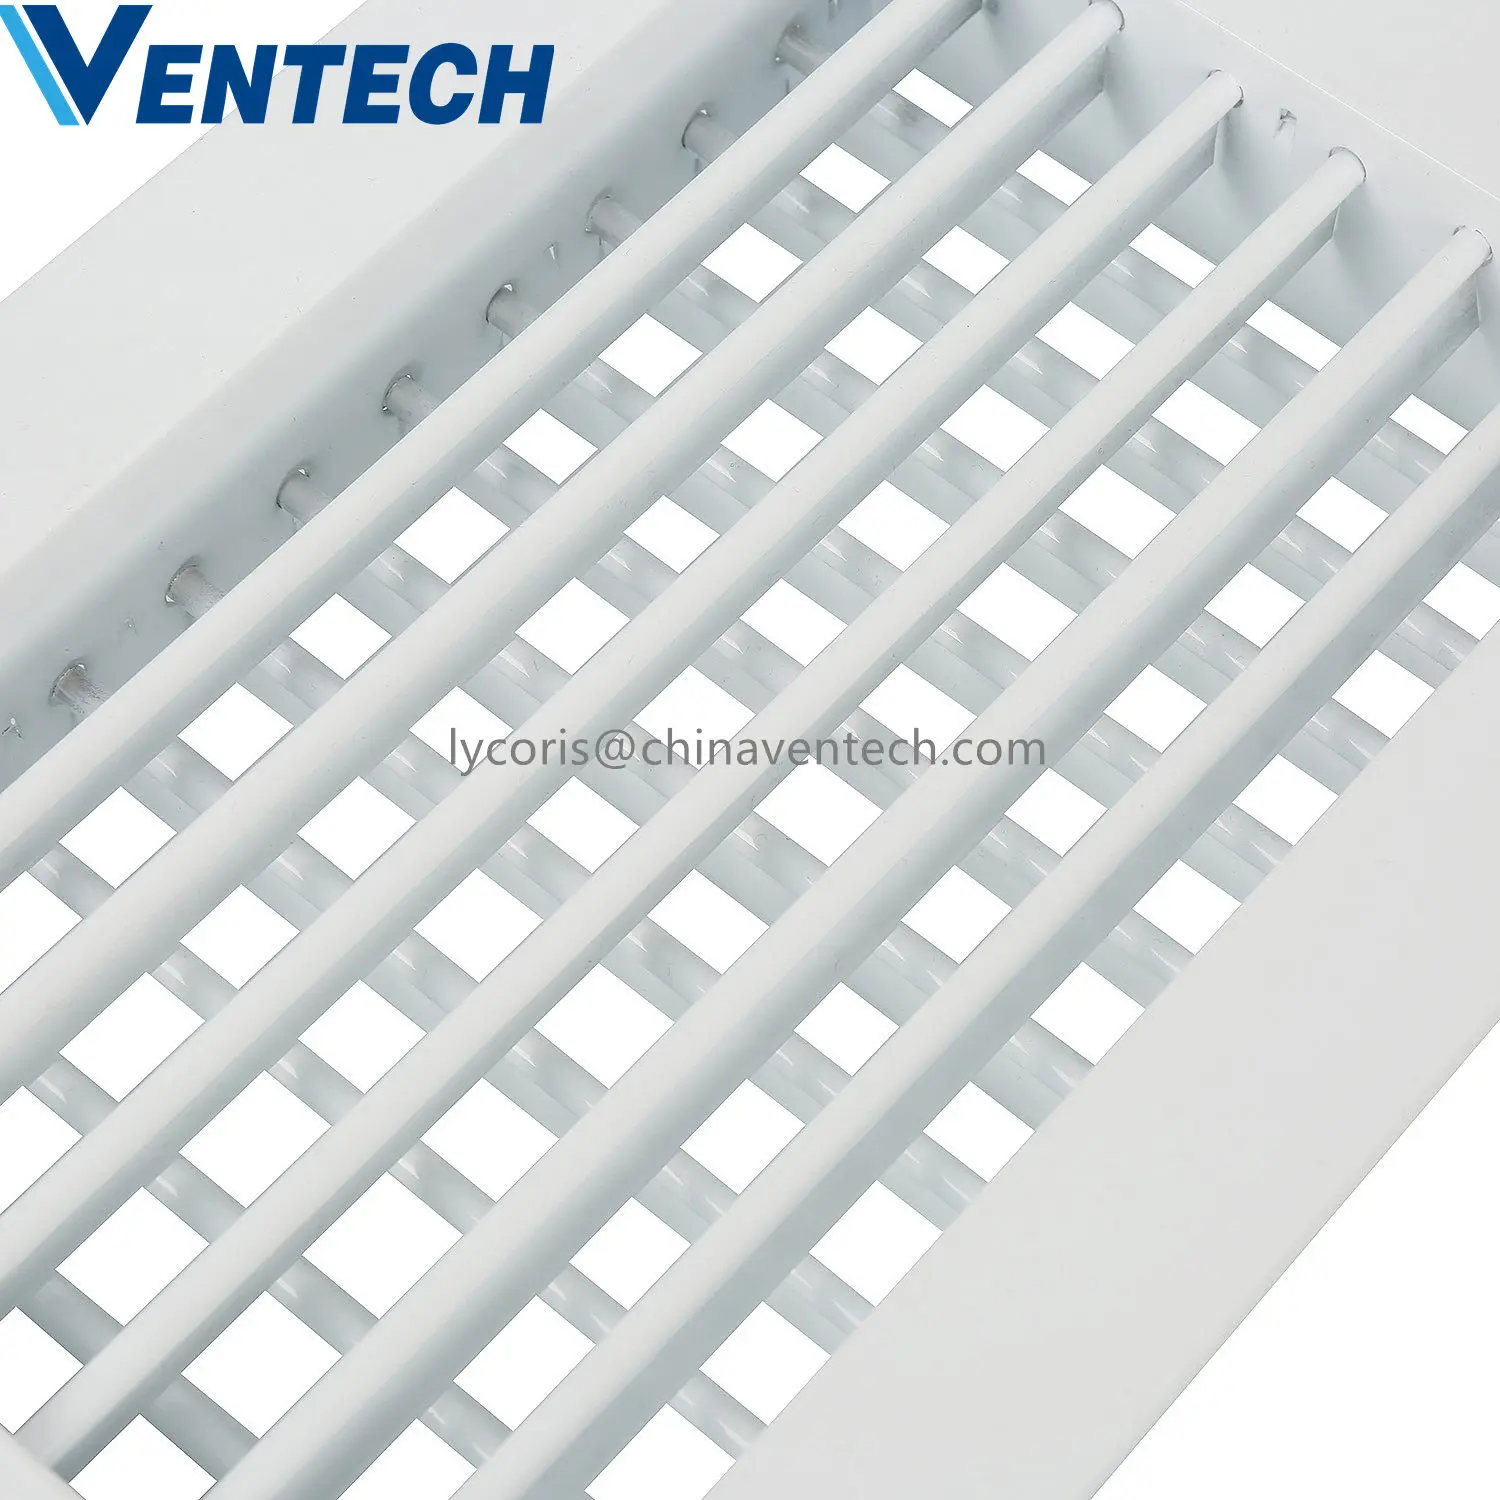 Ventech Air Ceiling Supply Double Deflection Adjustable Blades Air Grille Diffuser Vetilation Register Aluminum Grille